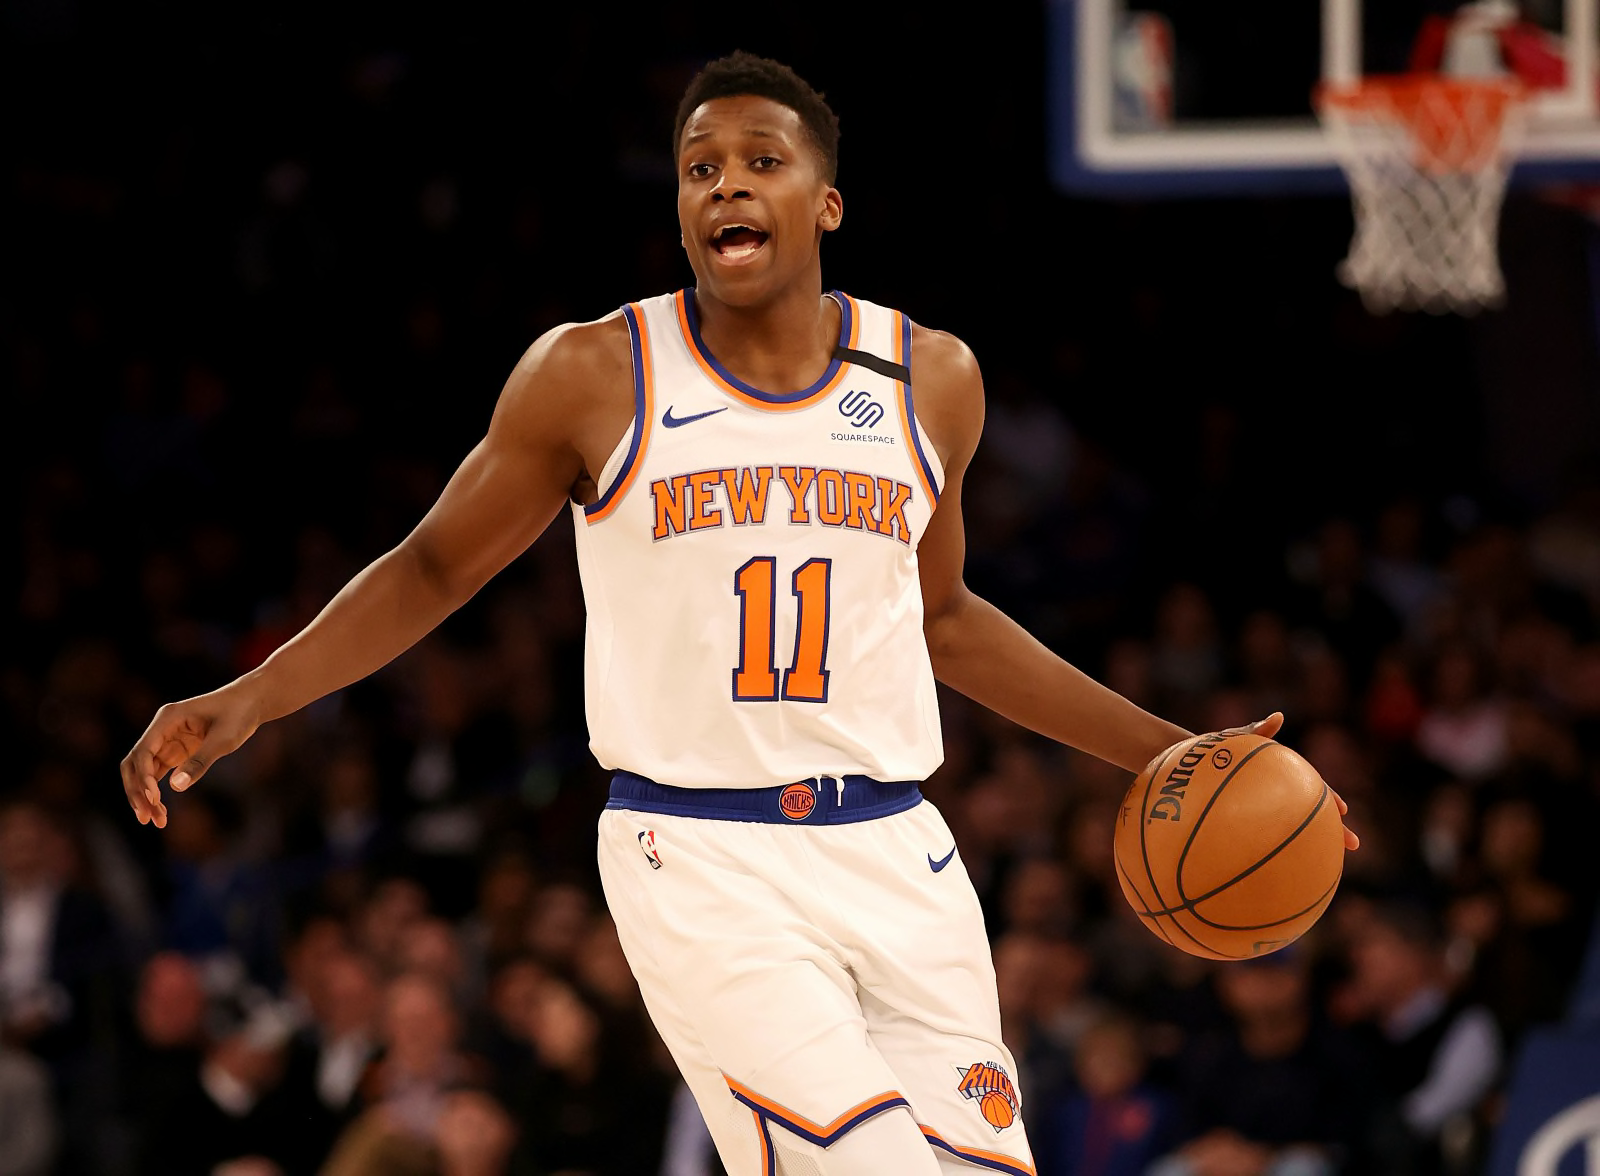 New York Knicks Players for Frank Ntilikina to study in isolation